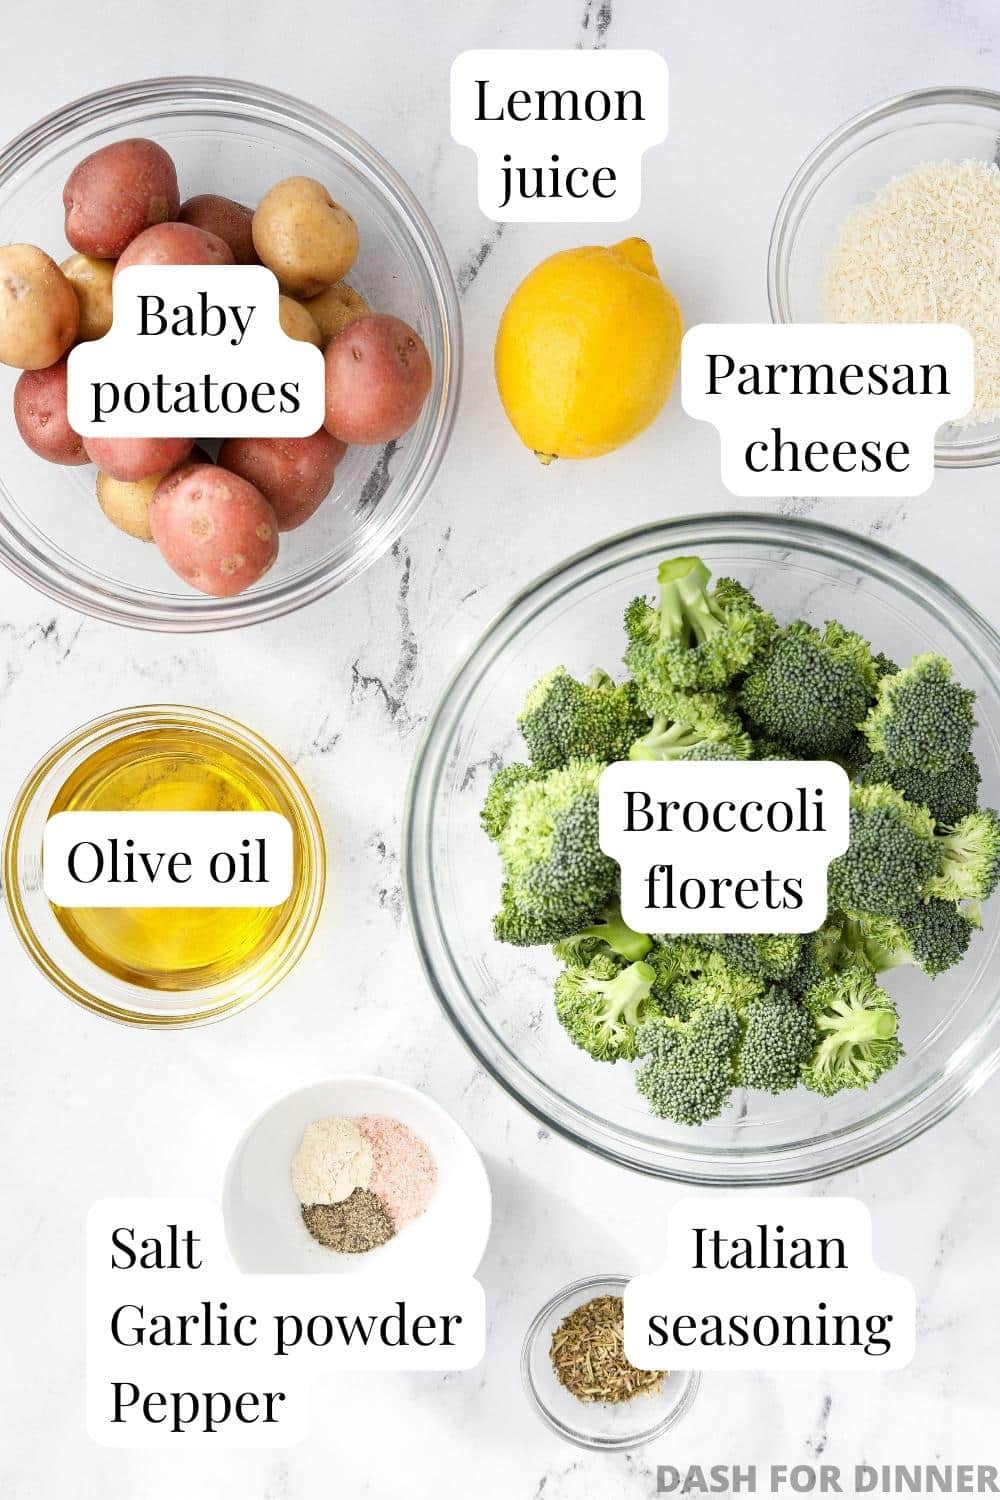 The ingredients needed to make broccoli and potatoes: olive oil, seasonings, lemon juice, and parmesan cheese.